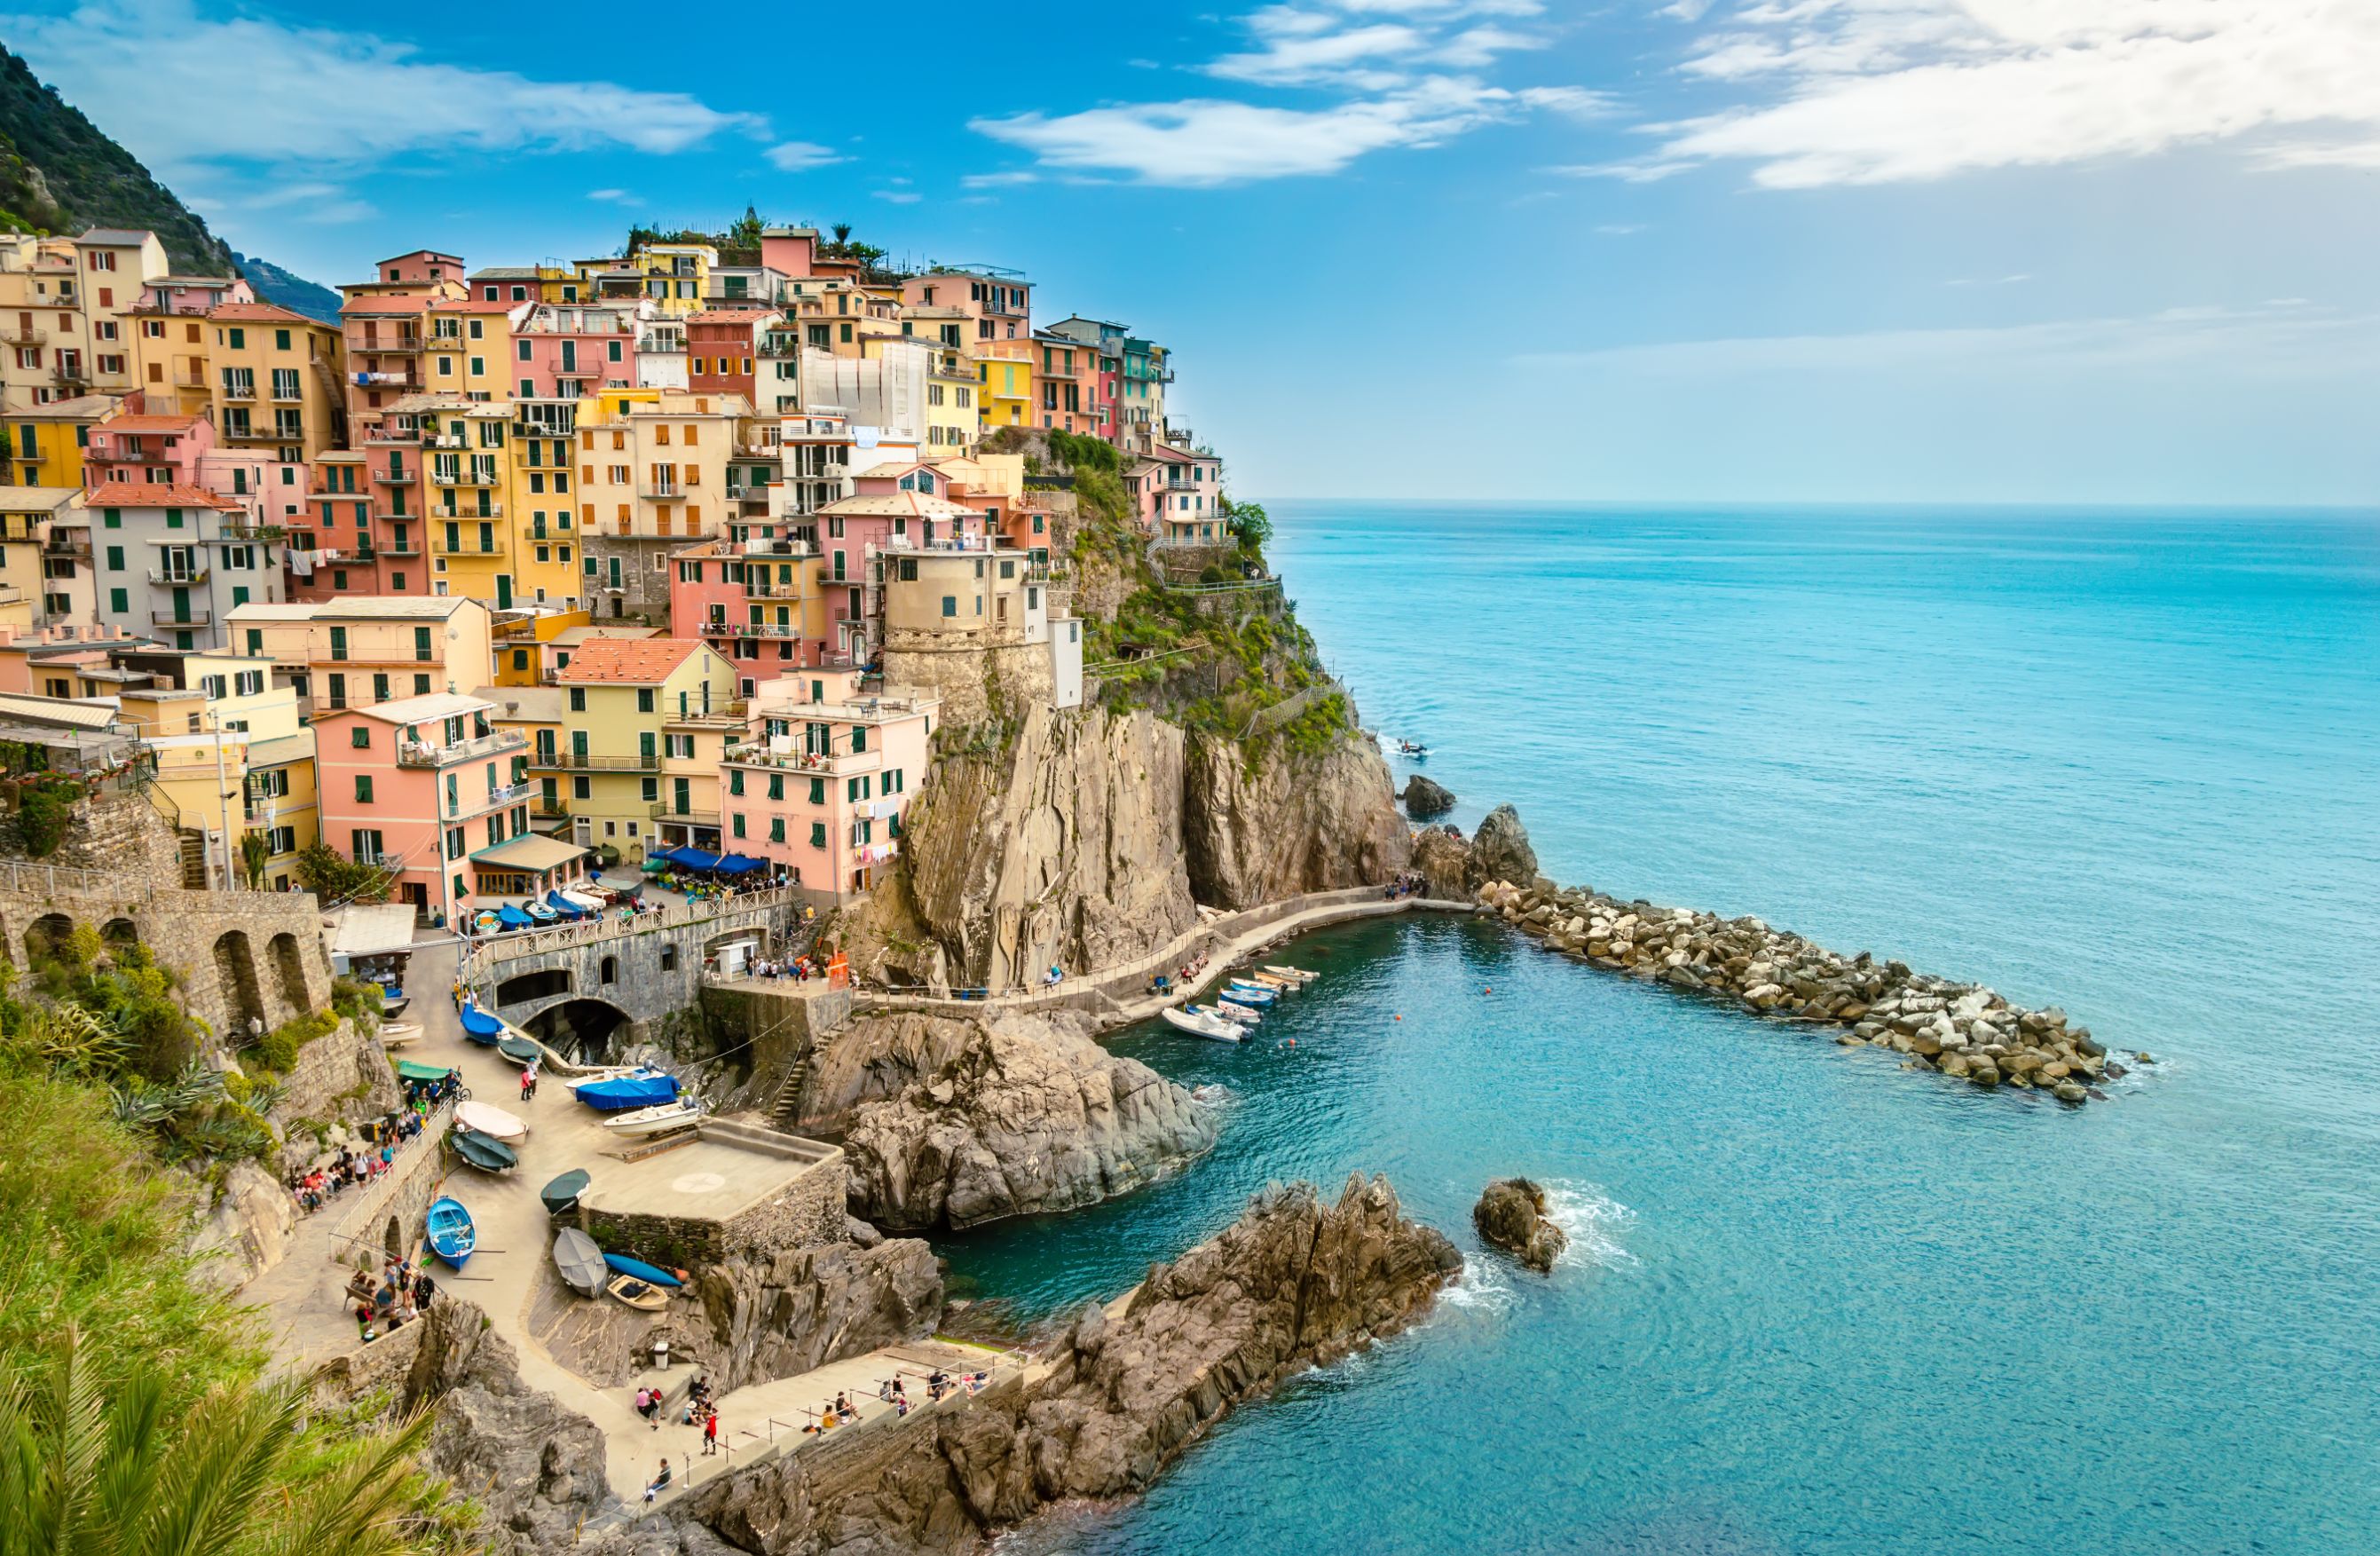 Manarola, Cinque Terre - romantic small village with colorful buildings on cliff overlooking sea. Cinque Terre National Park with rugged coastline is famous tourist destination in Liguria, Italy